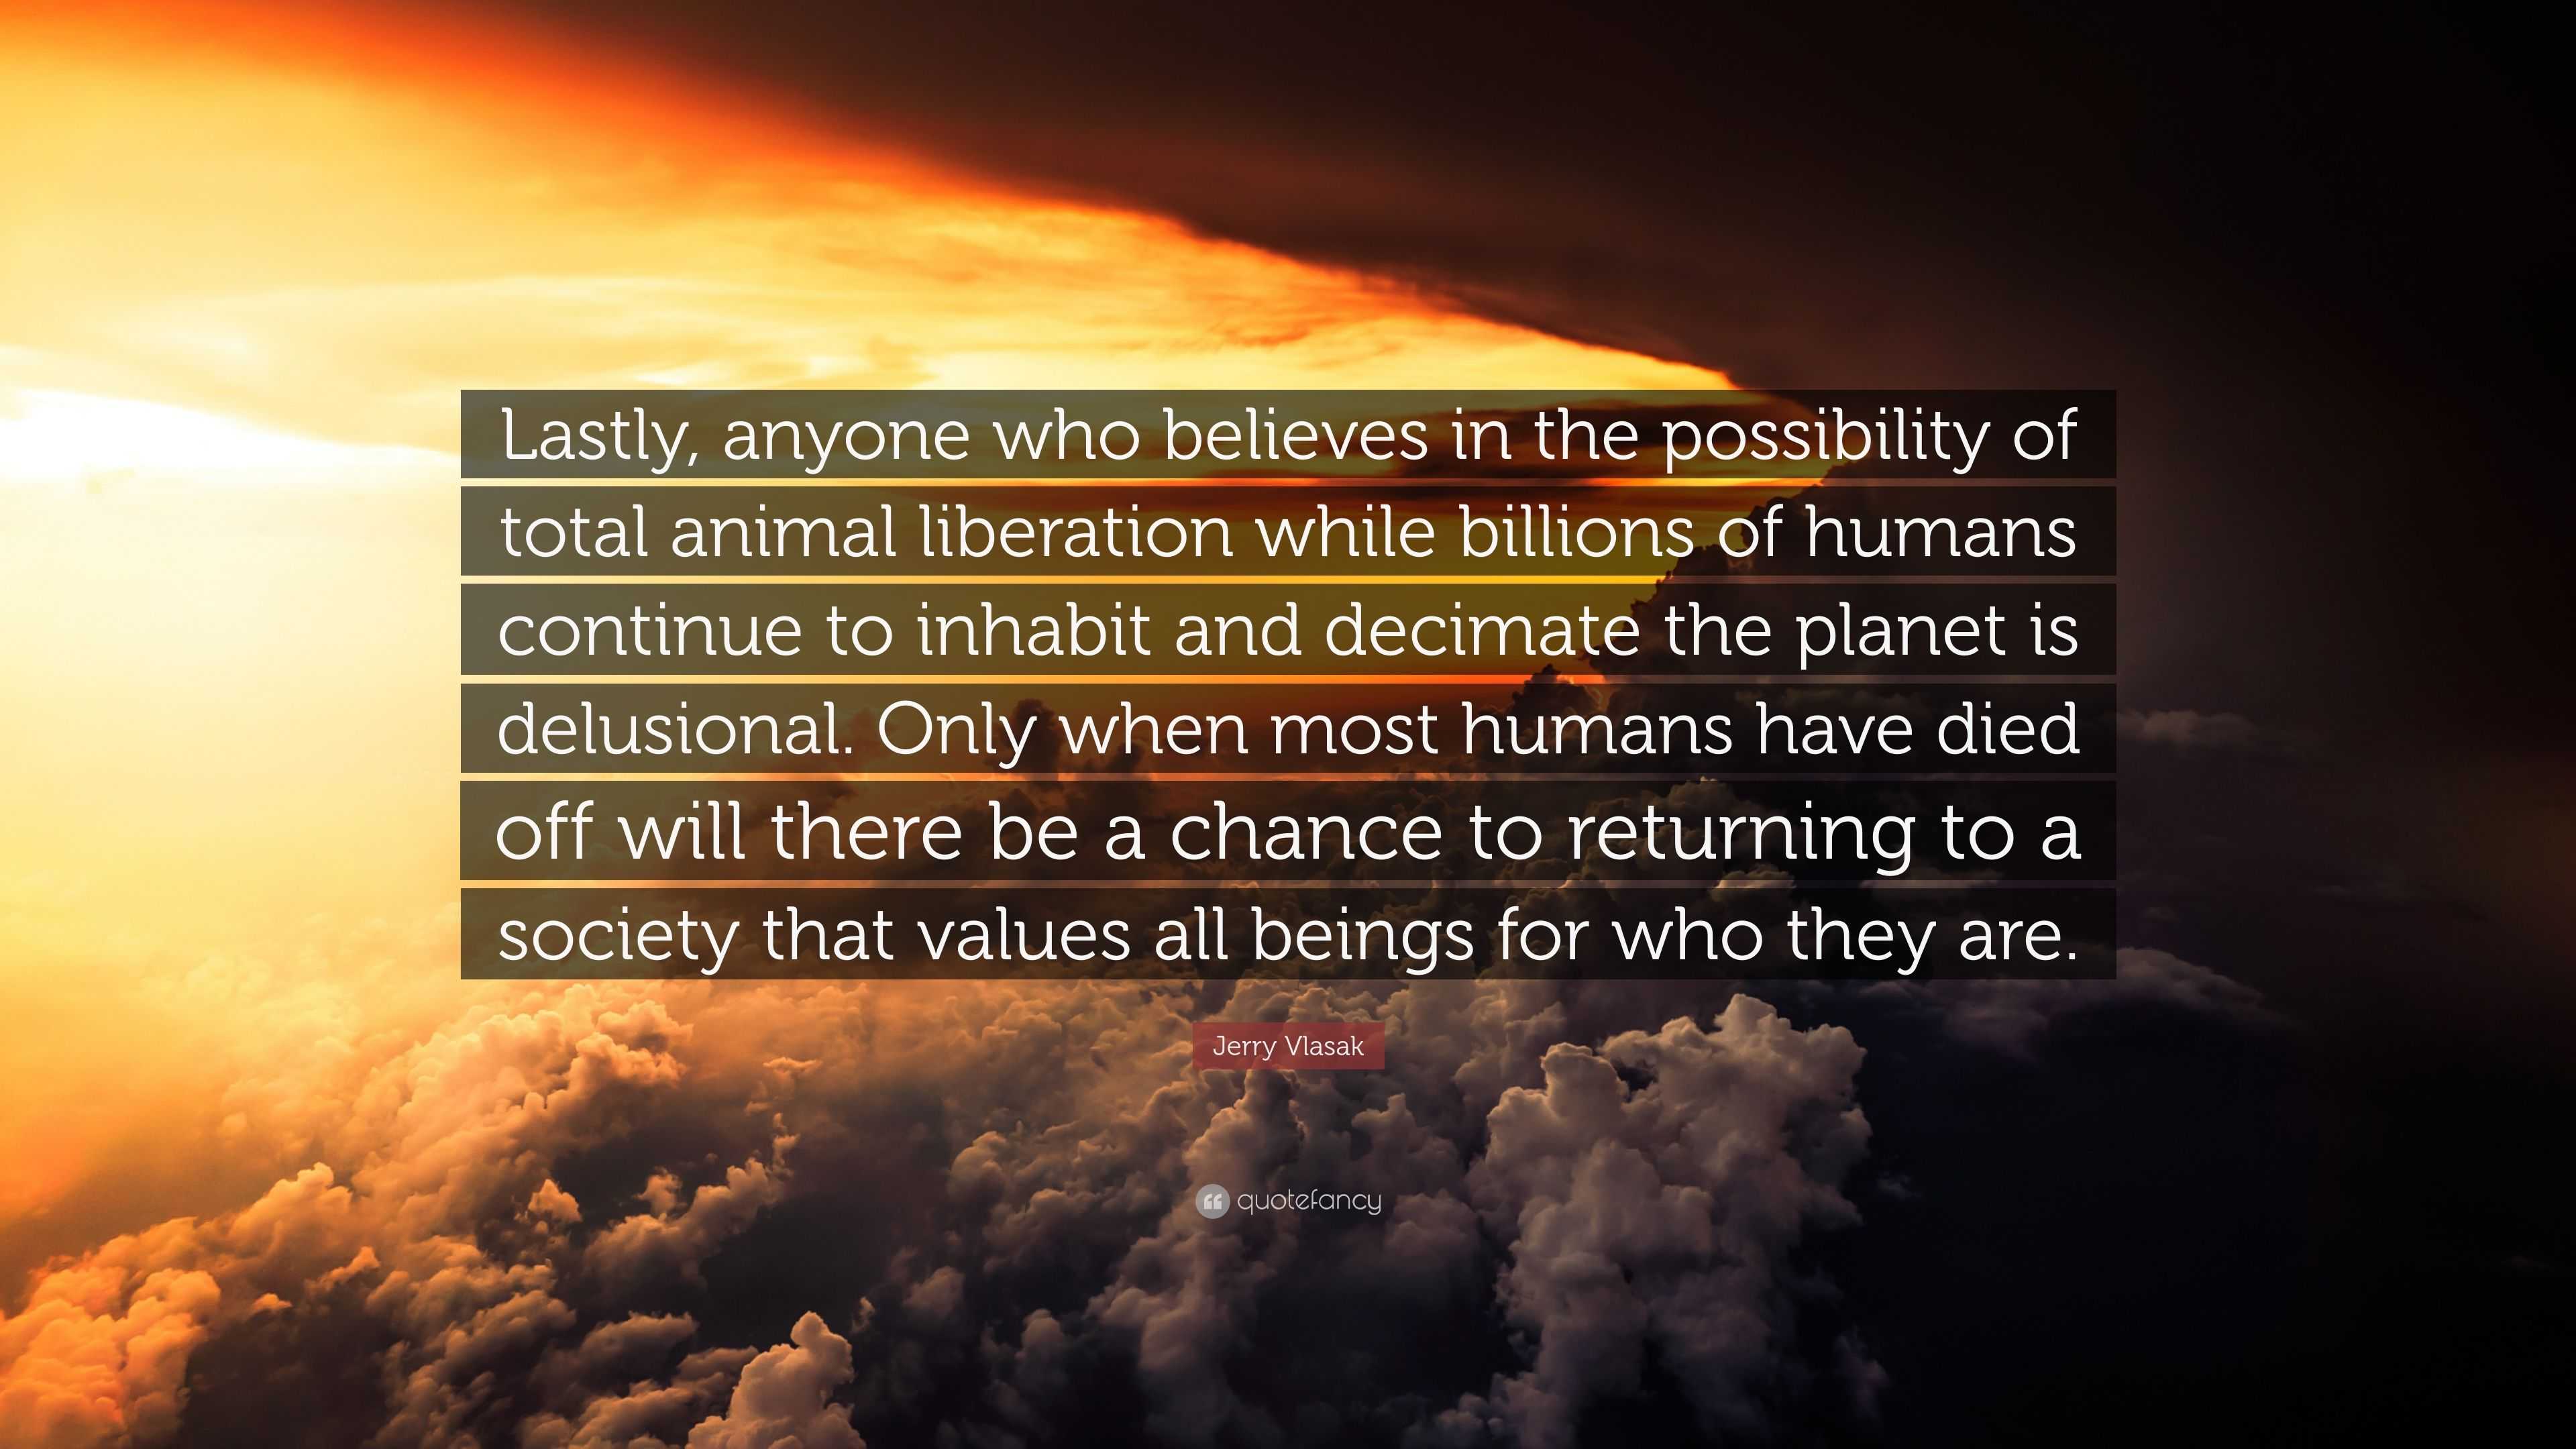 Jerry Vlasak Quote: “Lastly, anyone who believes in the possibility of total  animal liberation while billions of humans continue to inhabit a...”